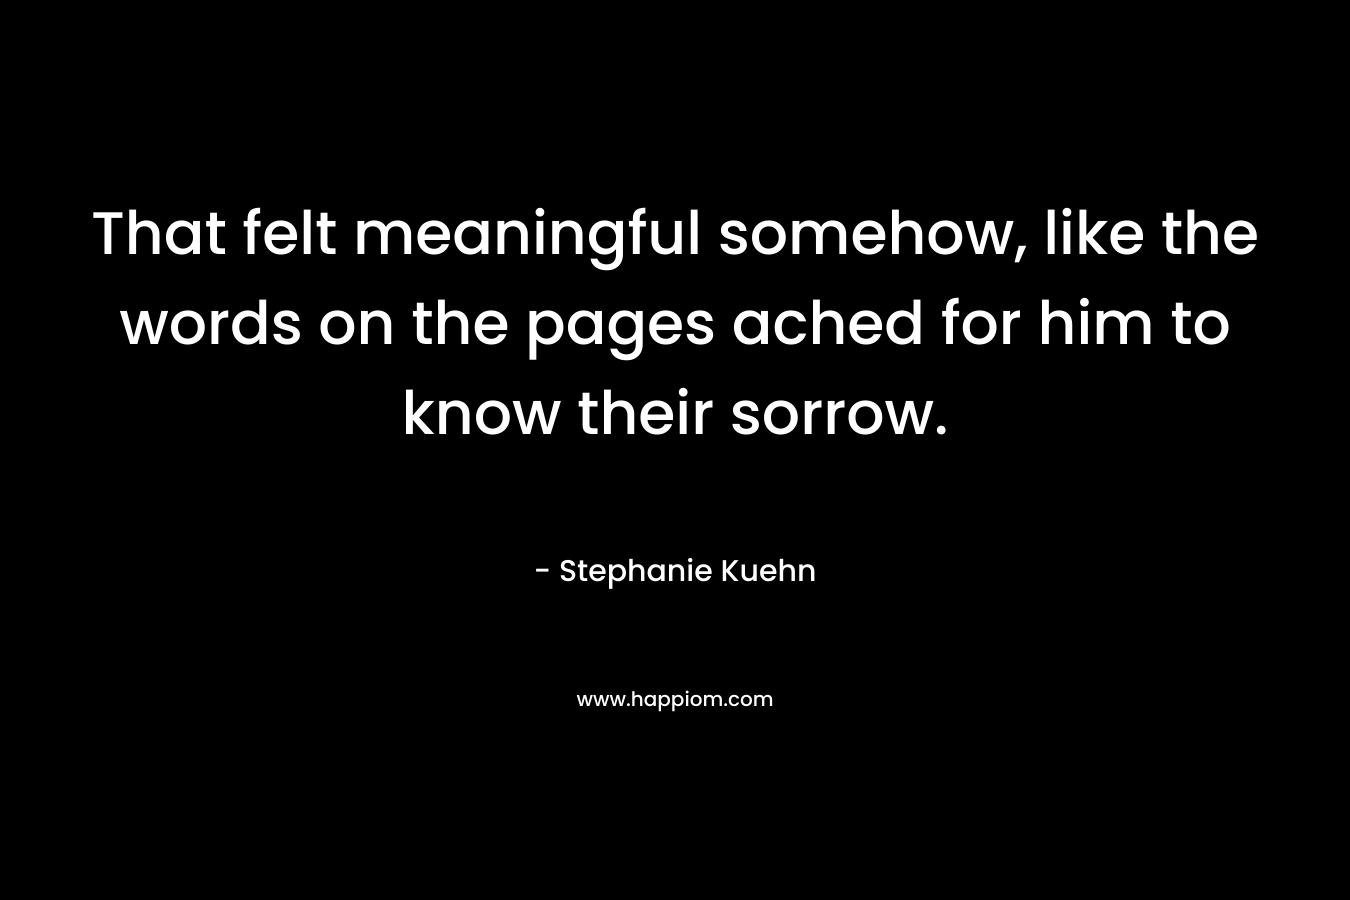 That felt meaningful somehow, like the words on the pages ached for him to know their sorrow. – Stephanie Kuehn